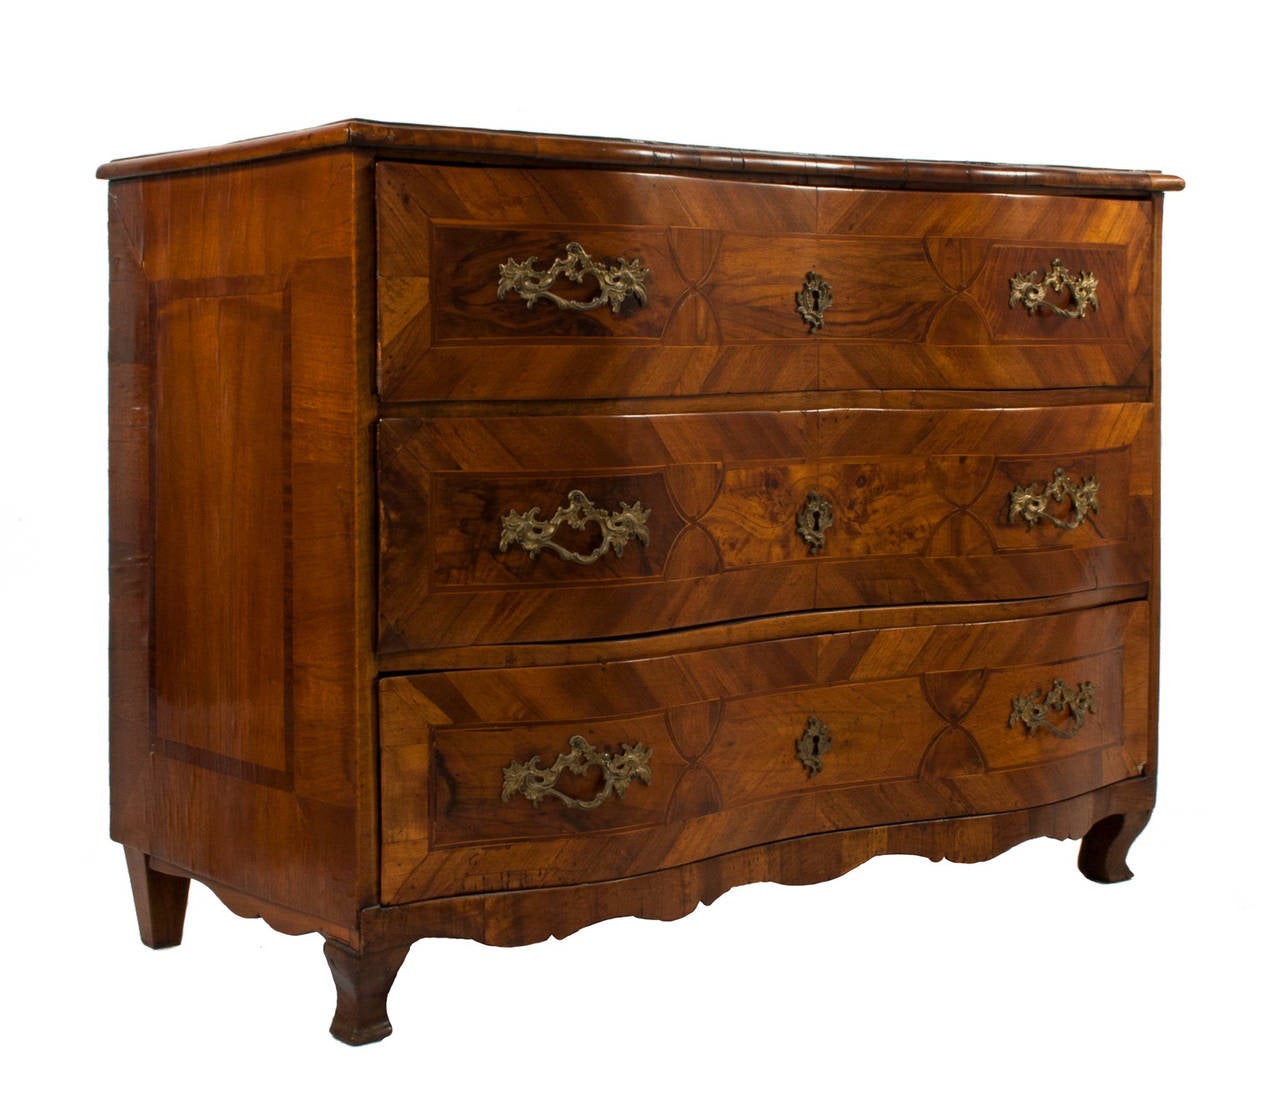 Rococo chest with three drawers in a veneer of various woods.